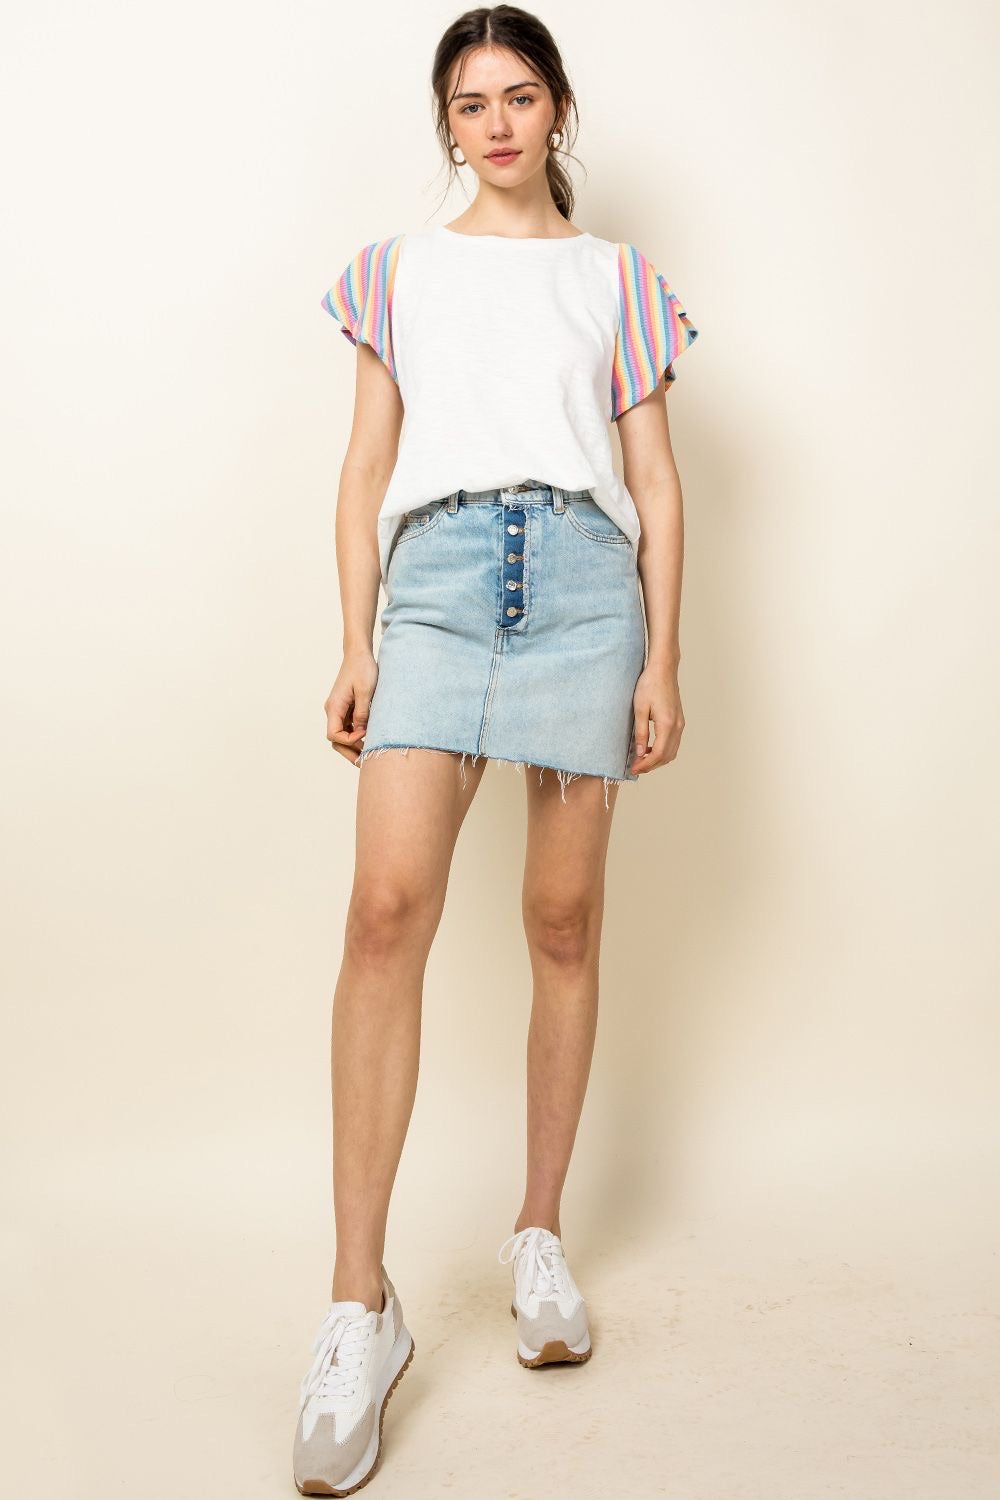 Candy Coated Flutter Tee-THML